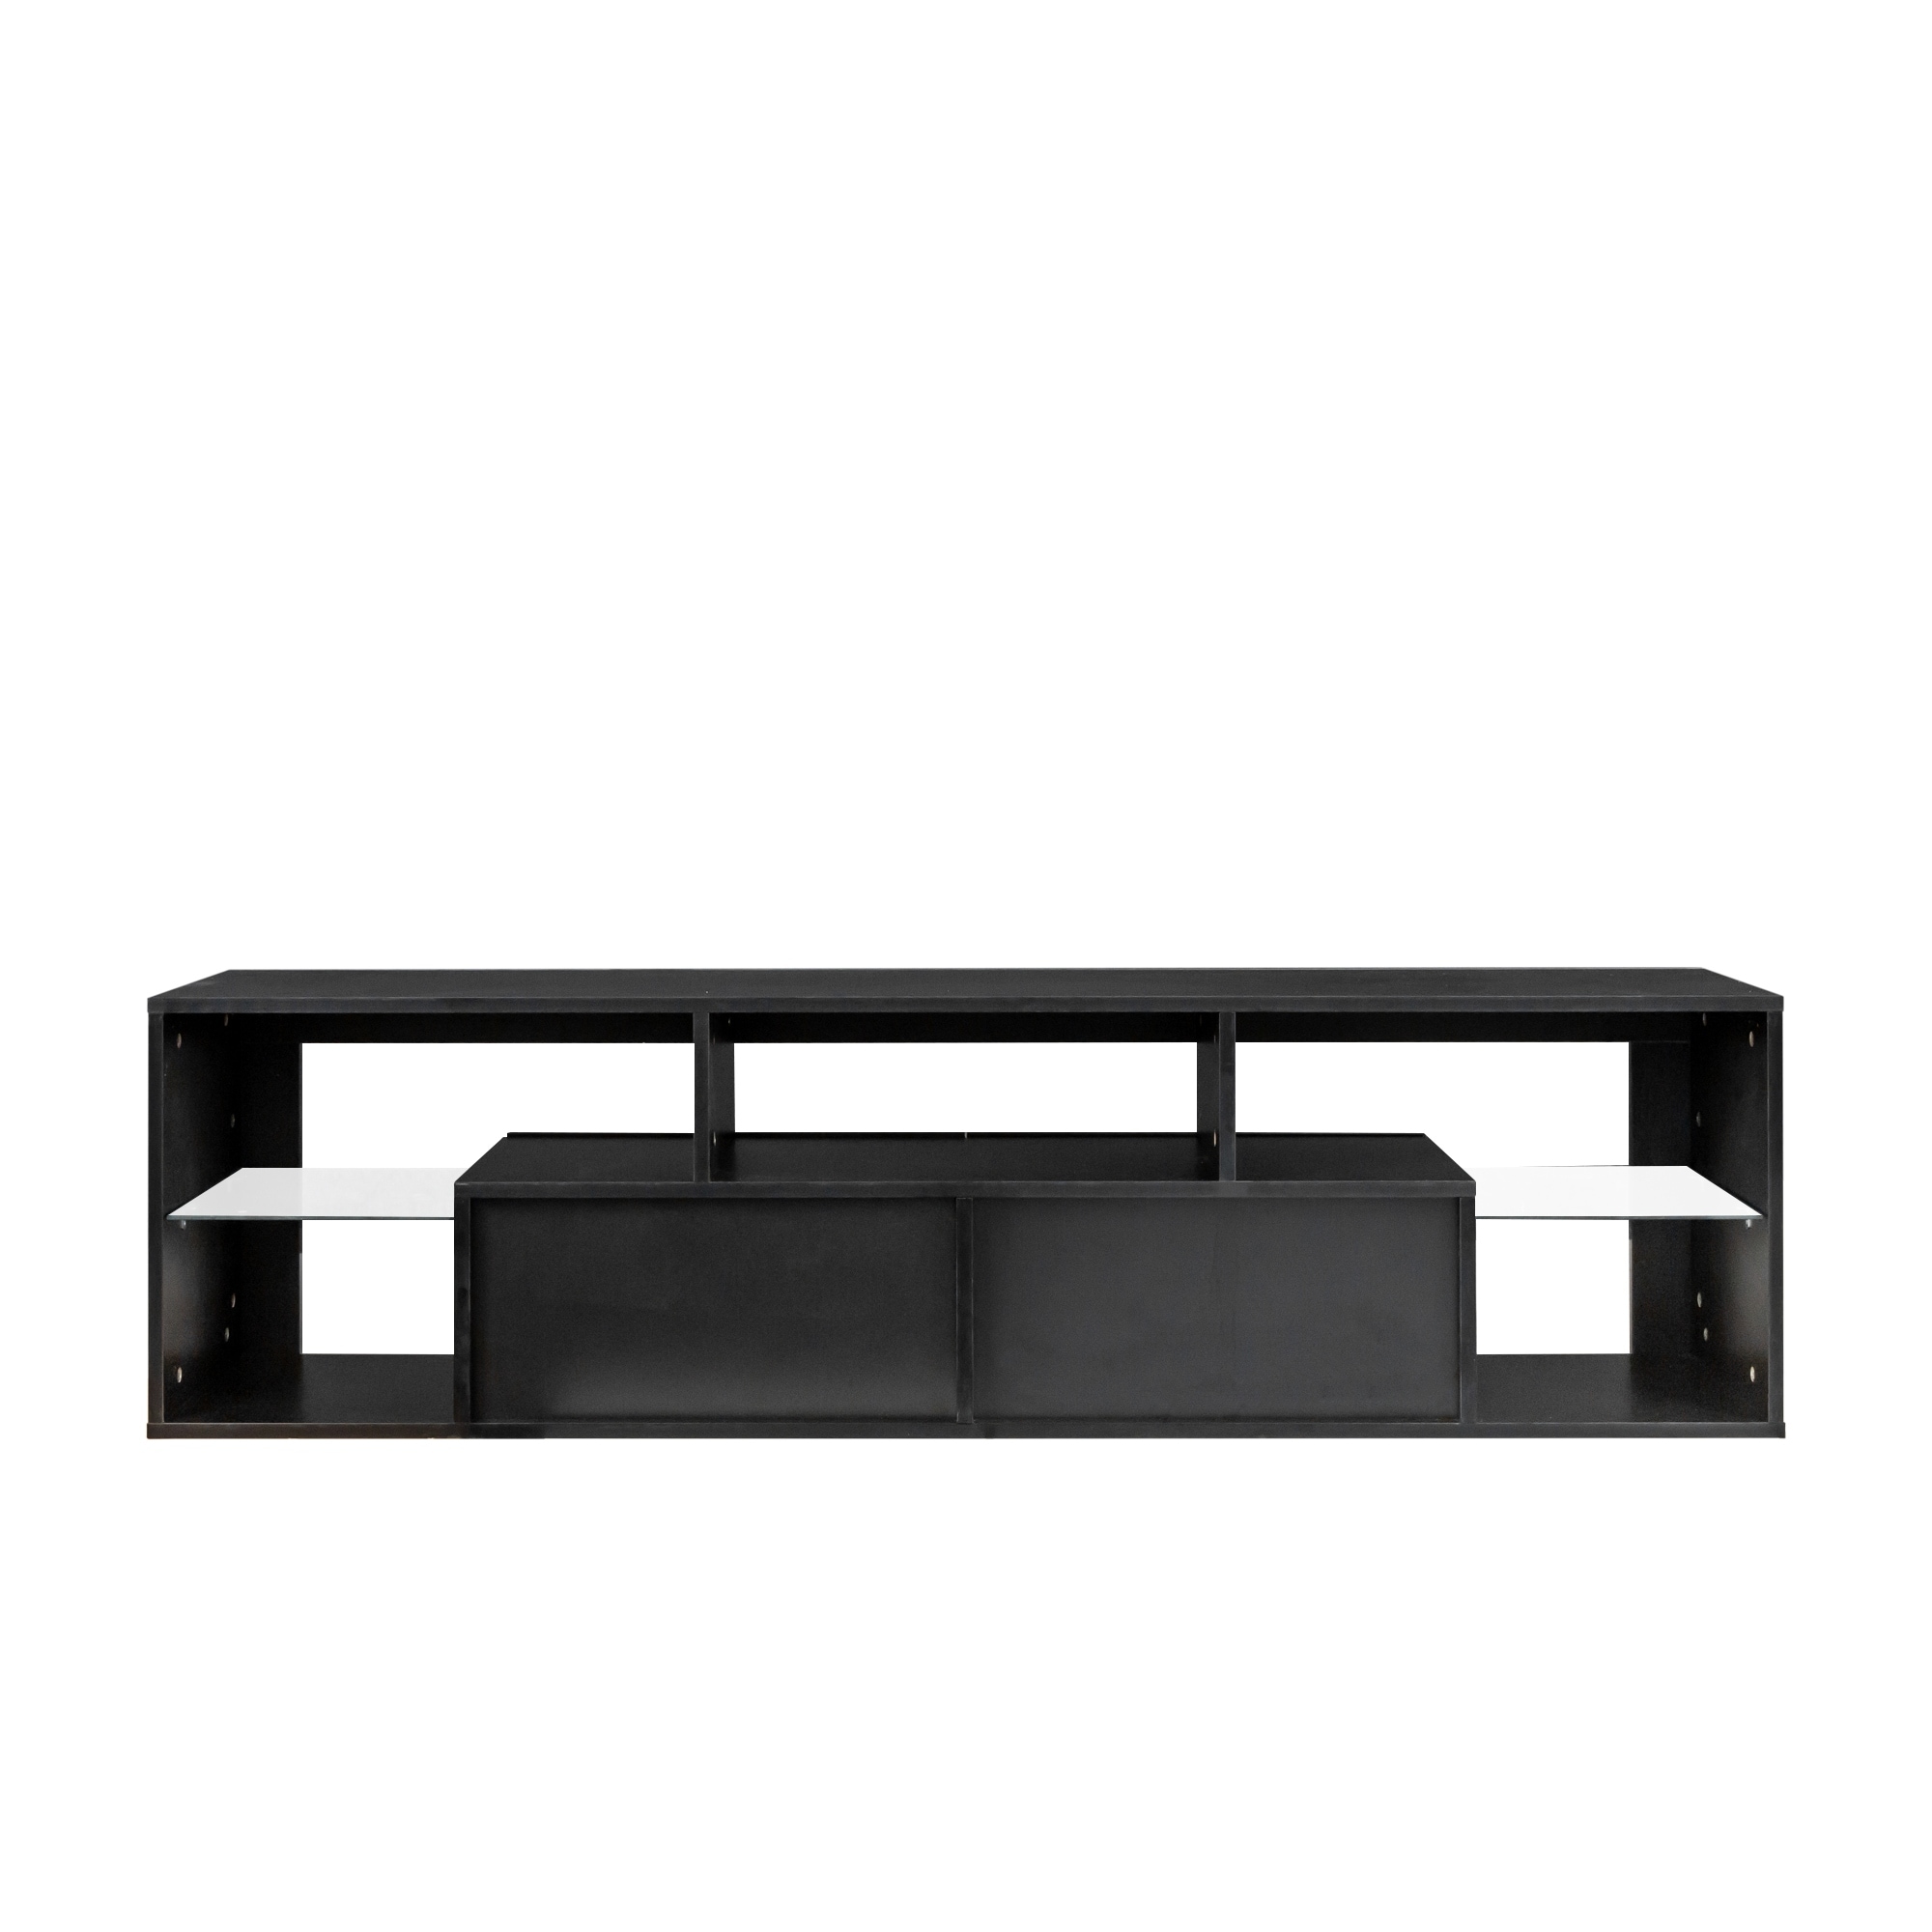 Modern TV Stand with 2 Drawers & 5 Open Shelves, Wall-Mounted Floating TV Console Cabinet with Remote-Controlled LED Lighting